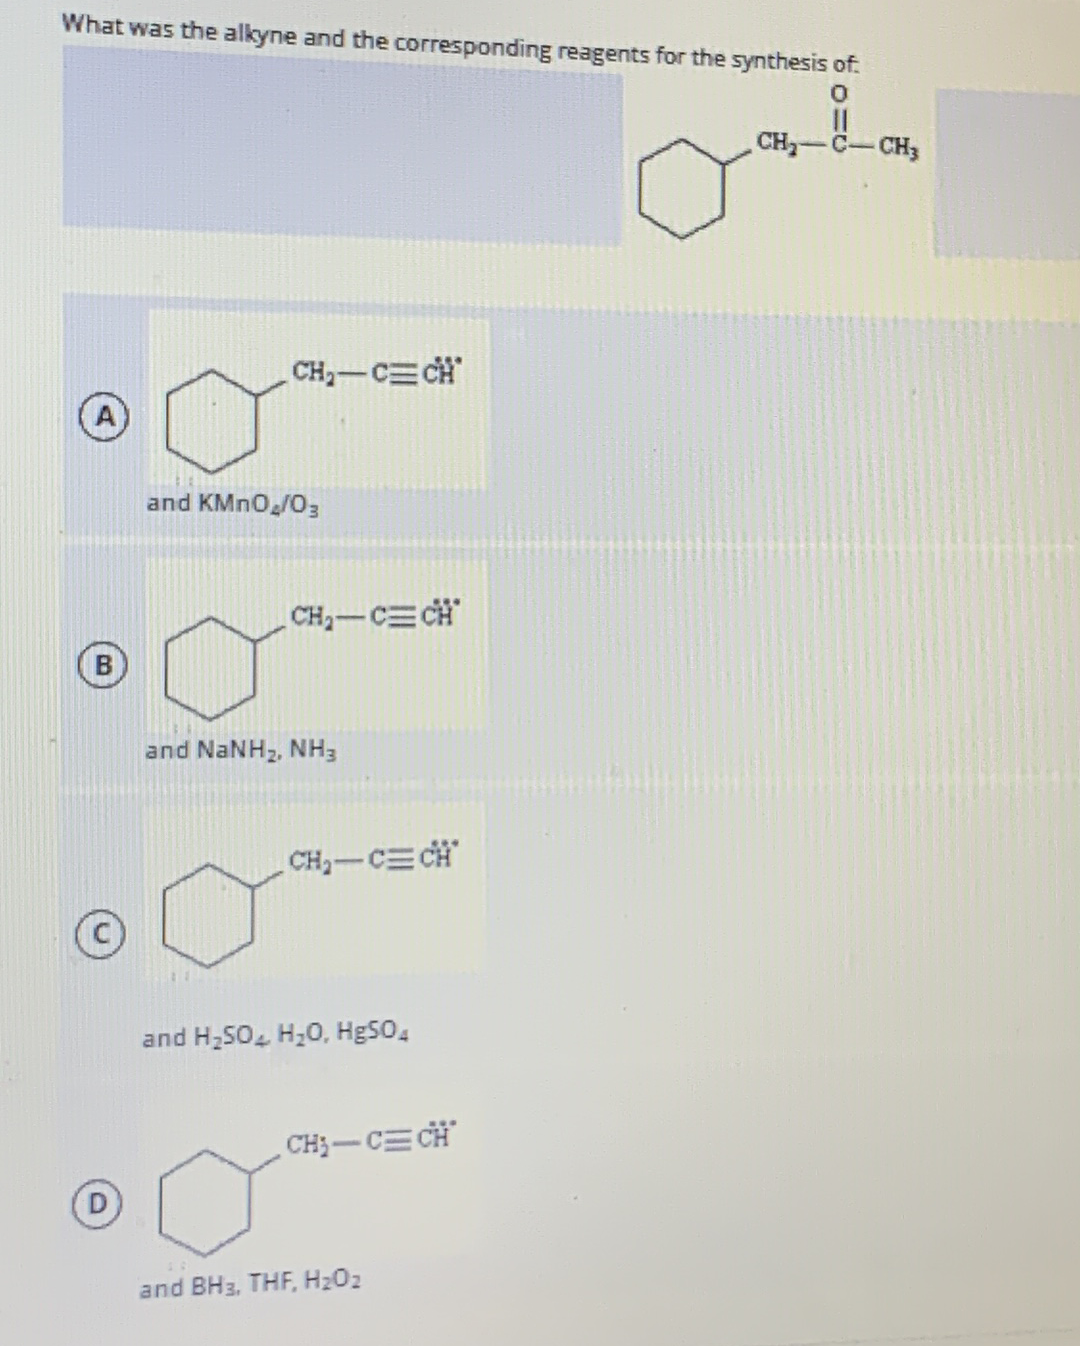 What was the alkyne and the corresponding reagents for the synthesis of.
II
CH-C-CH3
CH2-CECH
and KMNO,/03
CH2-C CH
and NaNH2, NH3
CH-CE CH"
and H,SO, H20, HBSO,
CH;-CE CH
and BH3, THF, H202
